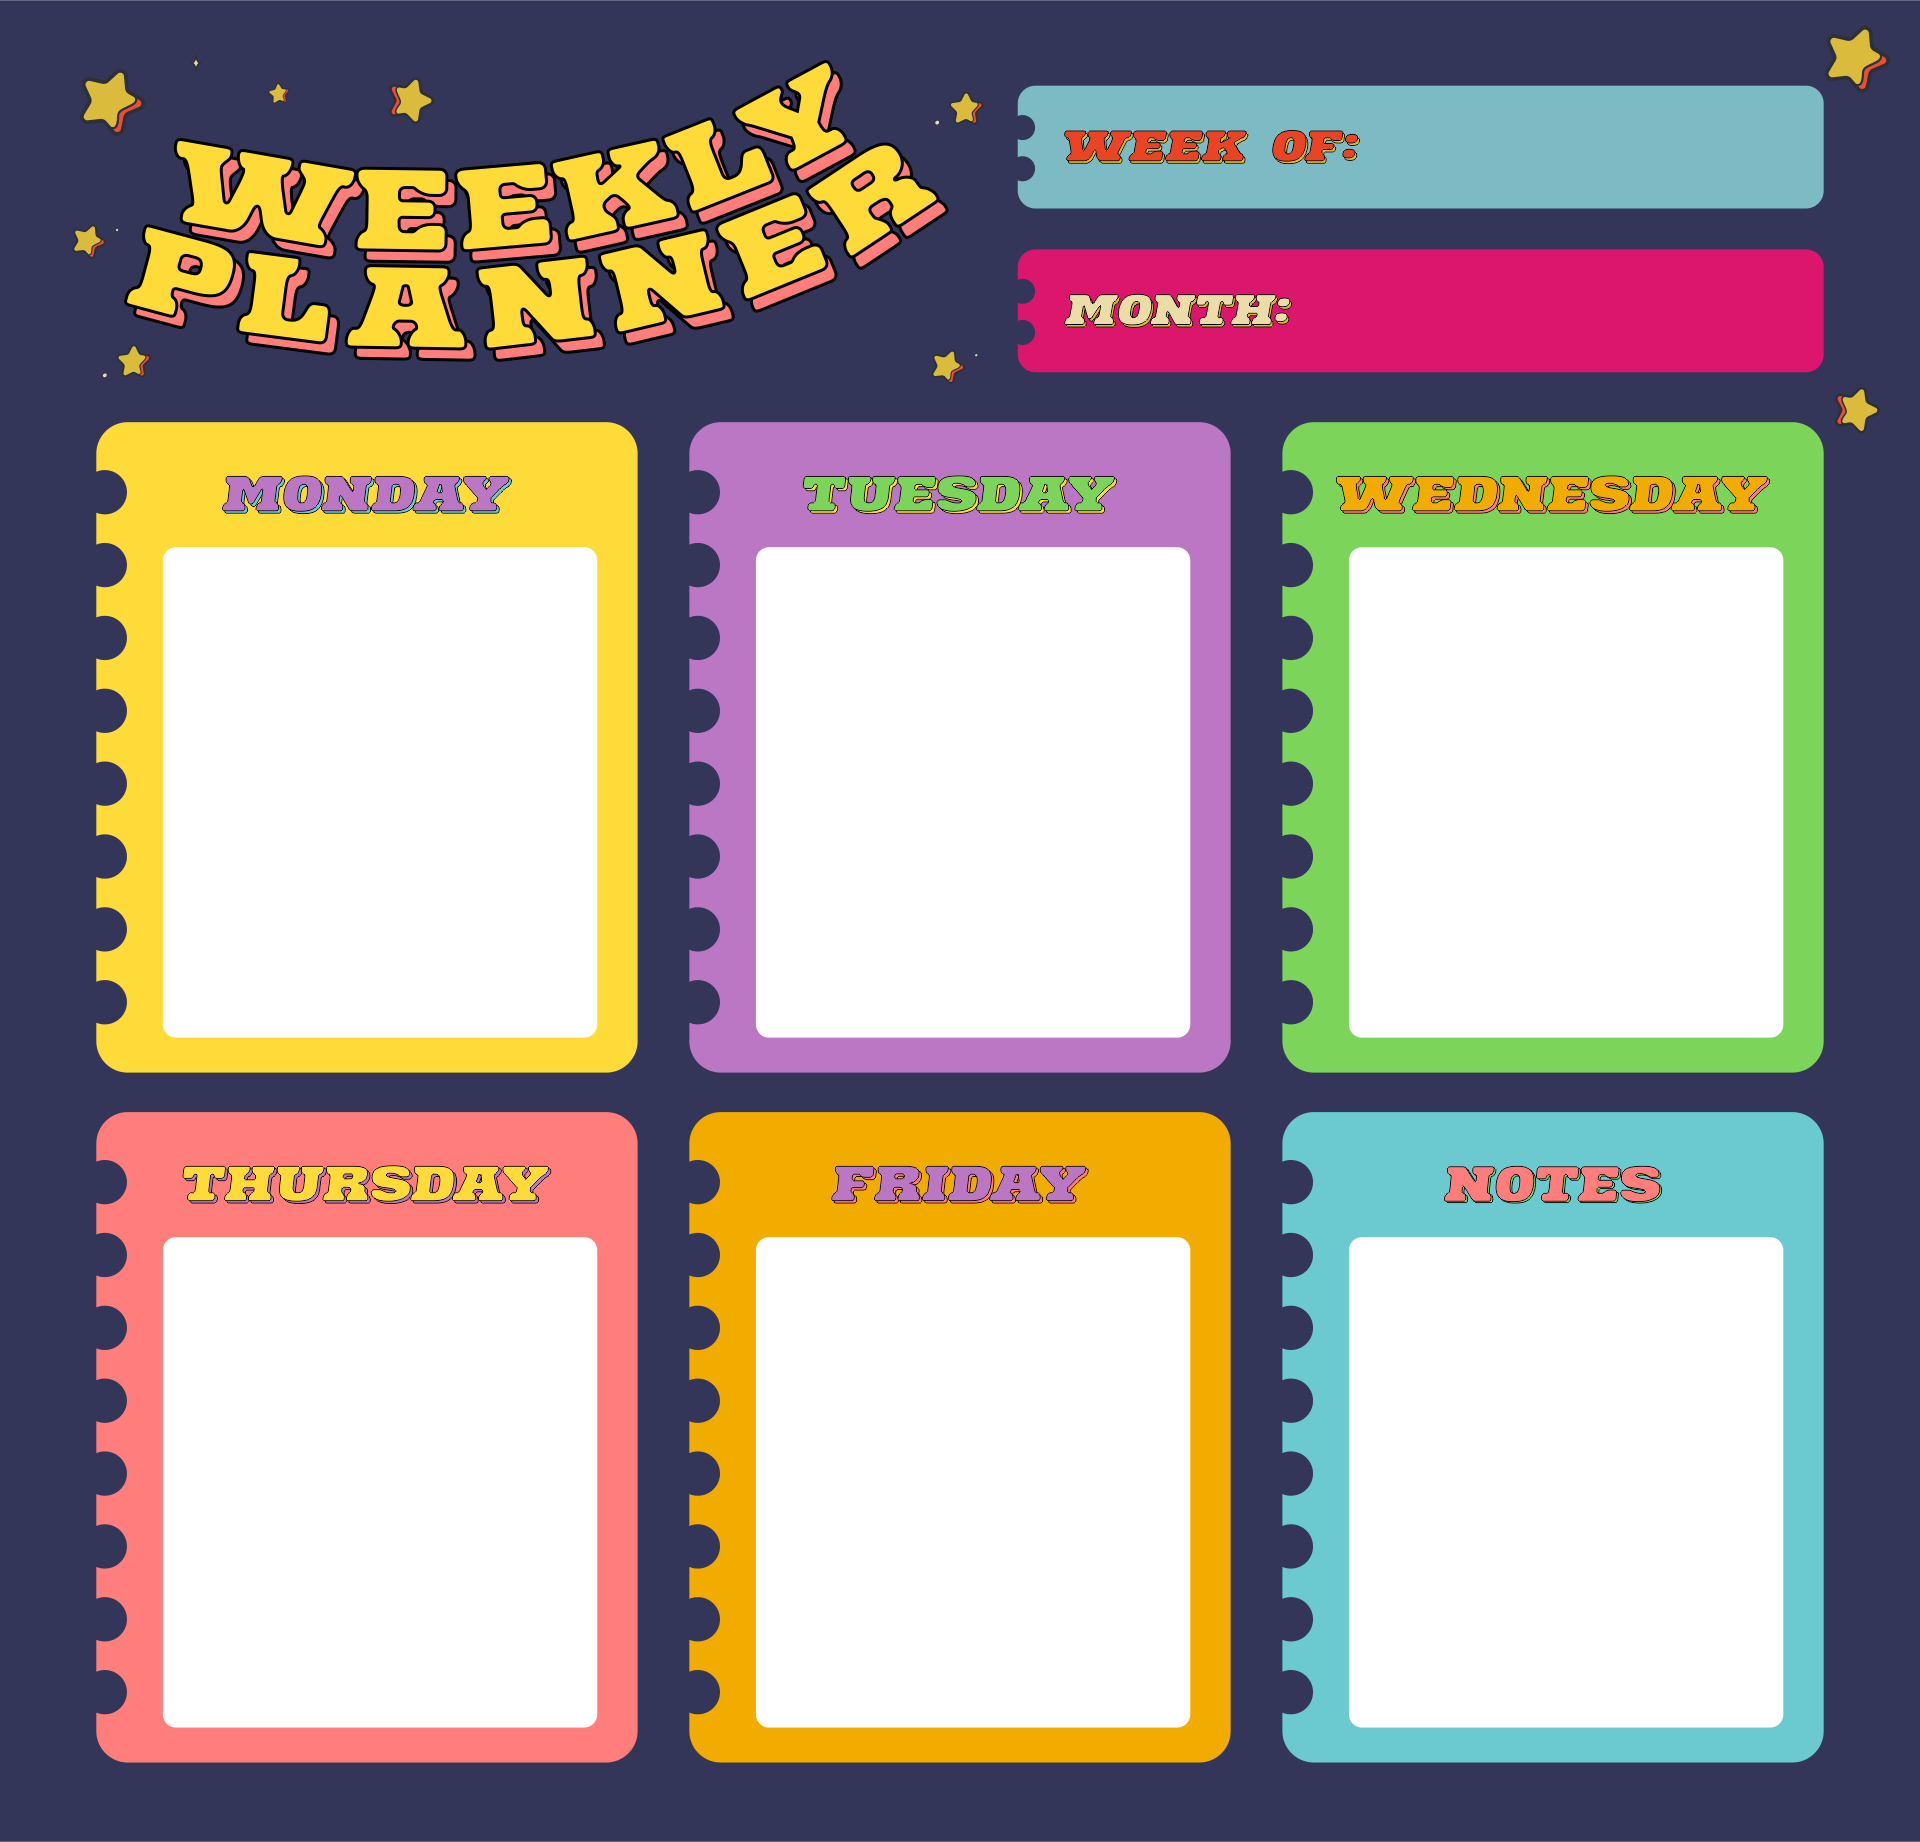 Free Weekly Planner Template Monday To Friday Schedule Printable Get 